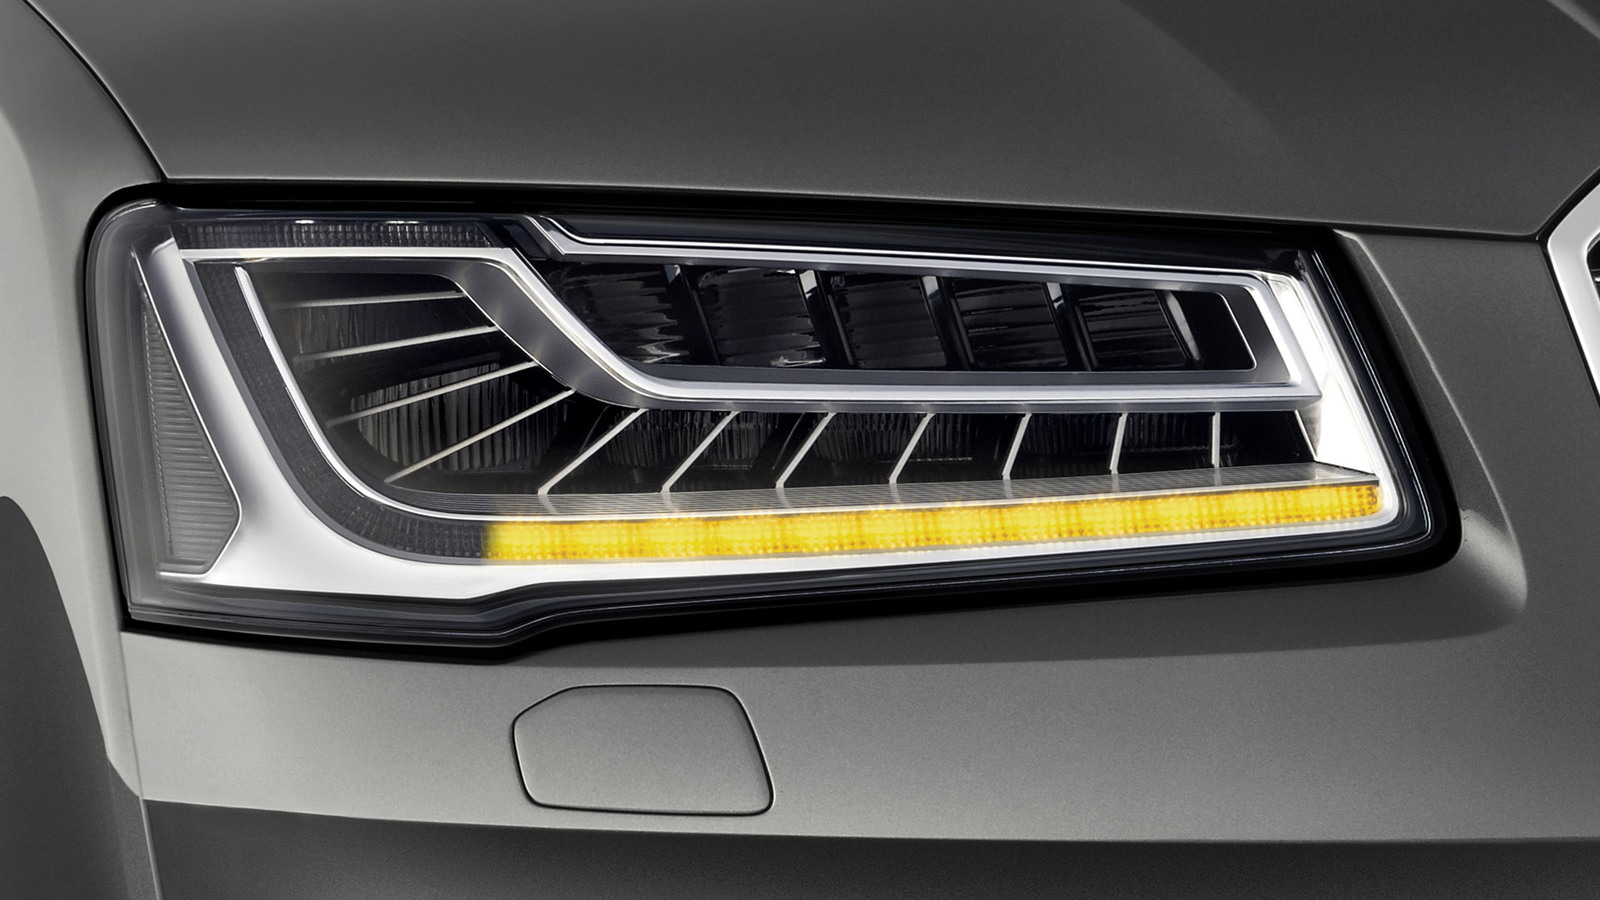 2015 Audi A8’s sequential turn signal